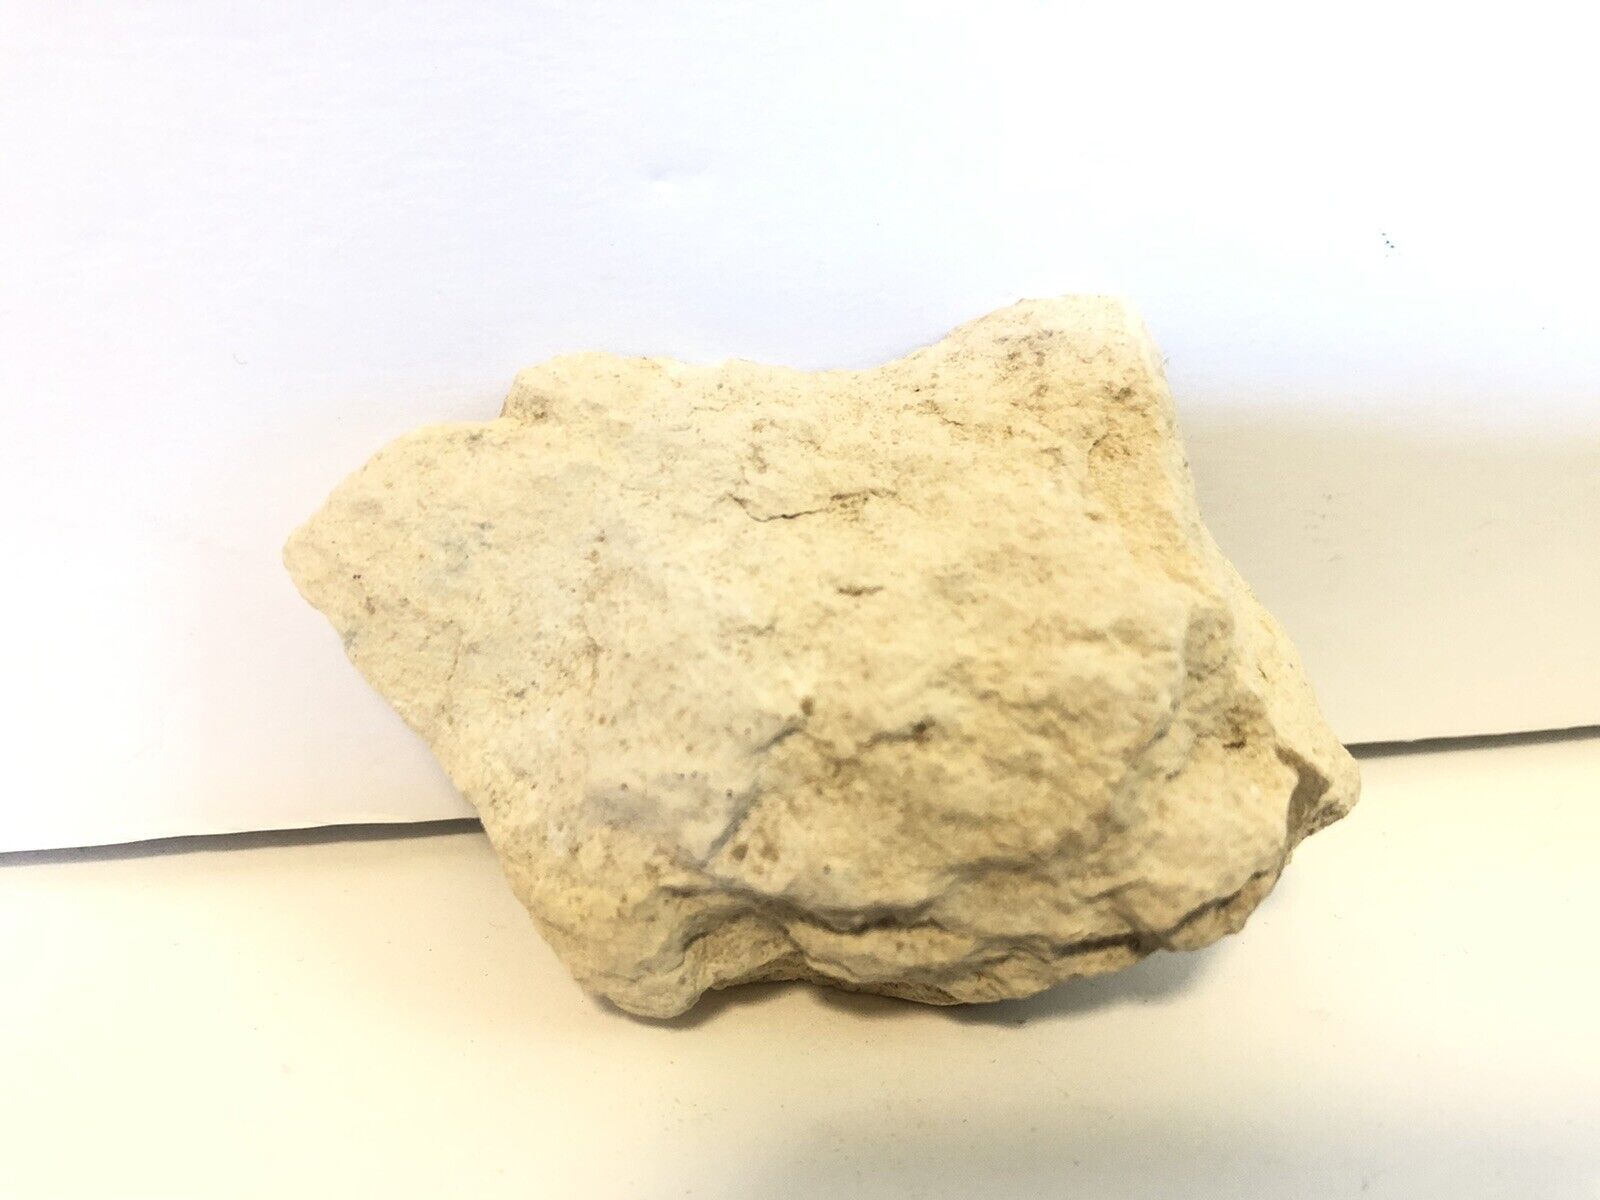 Rock from the great pyramid of Giza Egypt ￼Rock 3.7 OZ